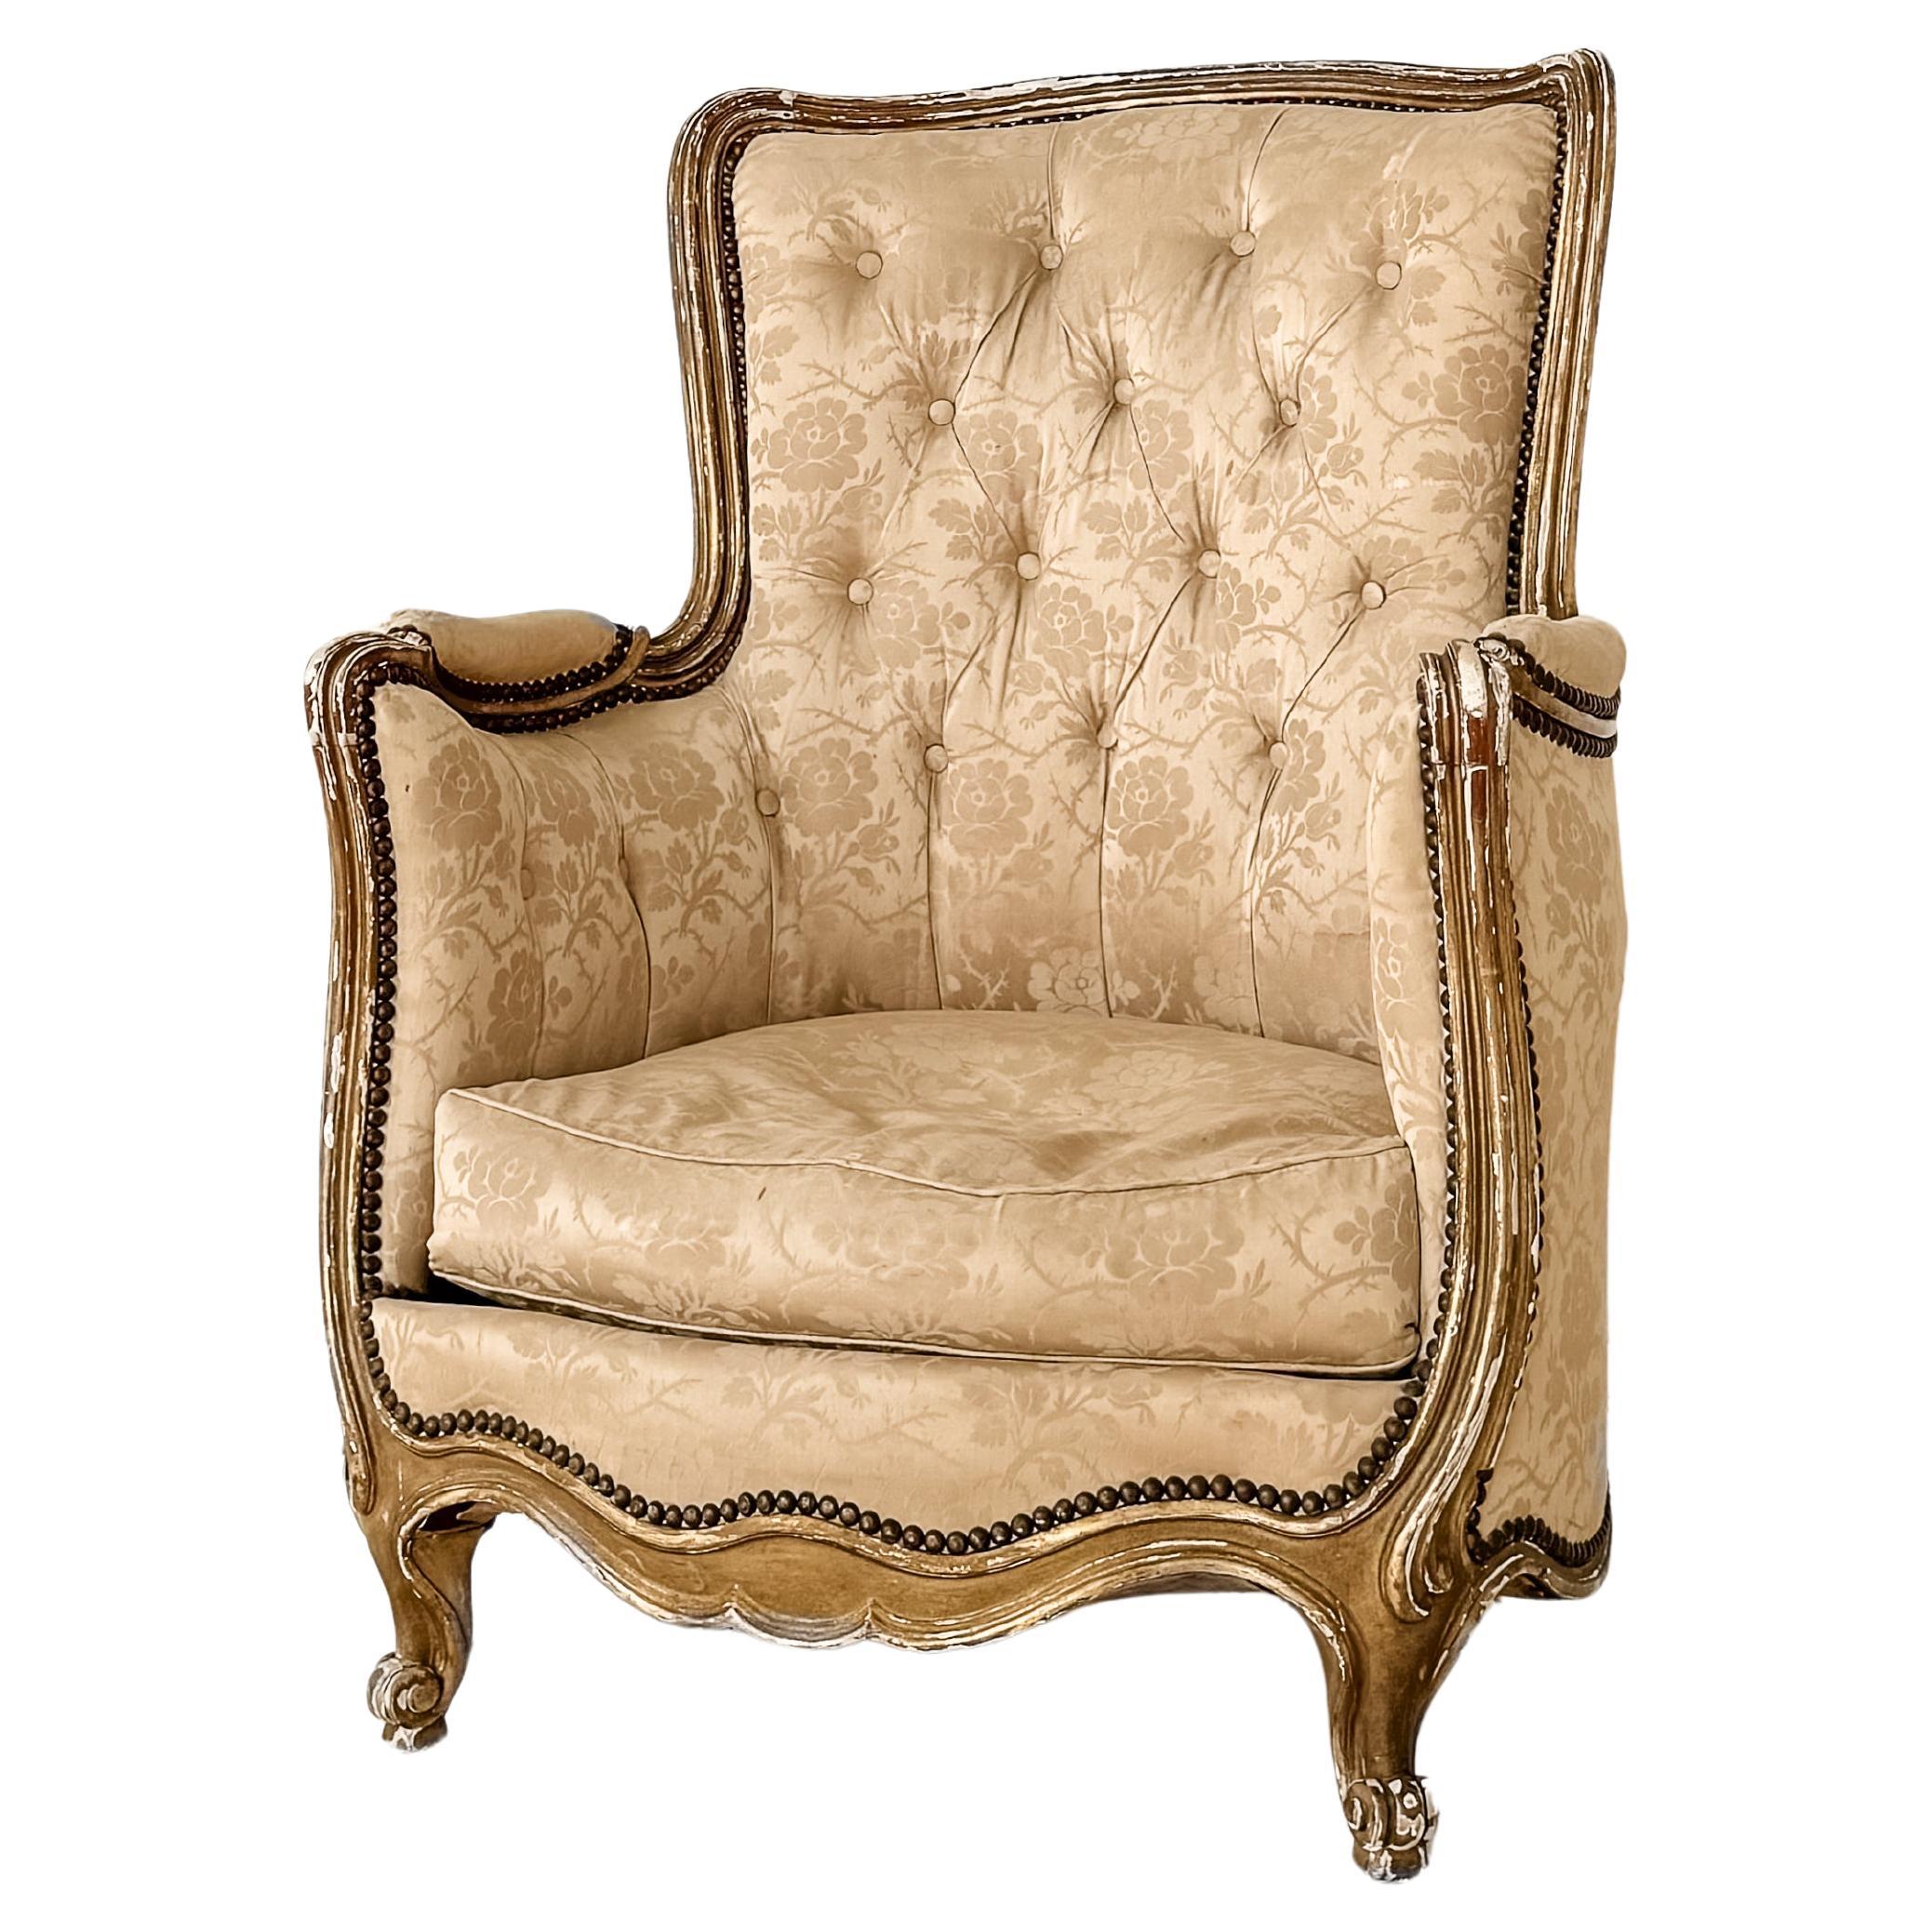 Tufted Silk Damask Louis XV Style Bergere Chair For Sale